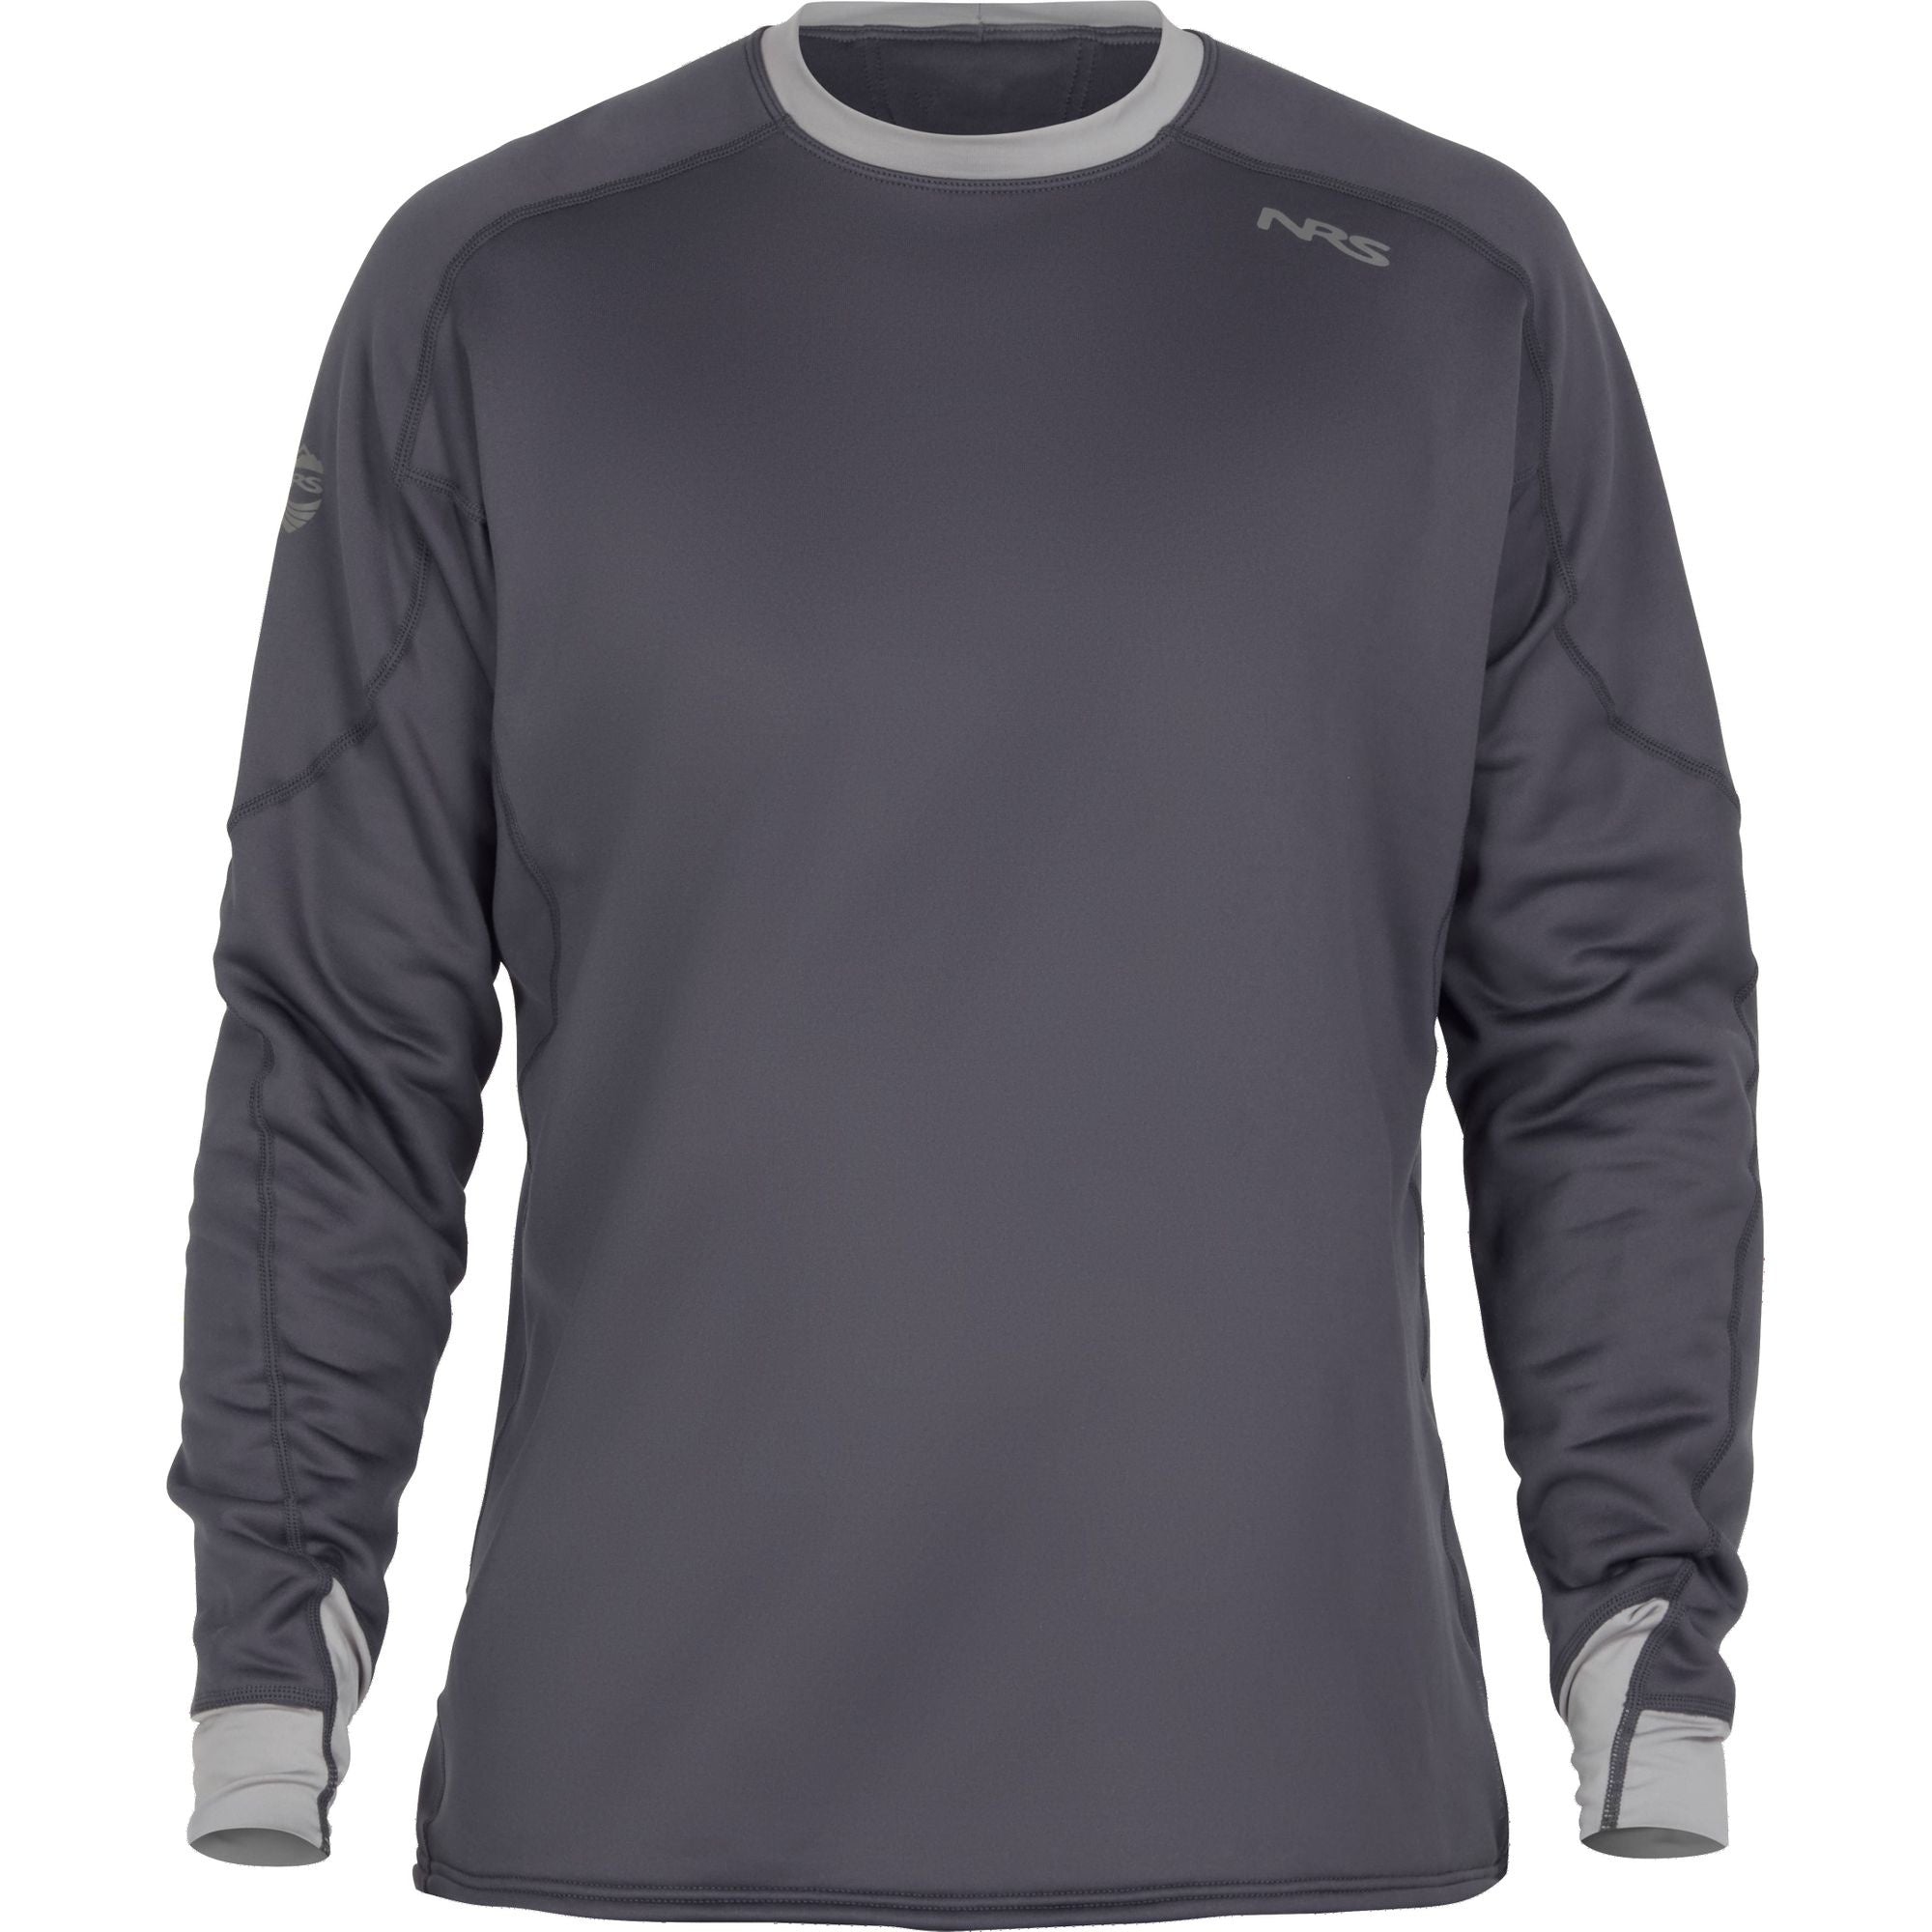 NRS - Expedition Weight Shirt Men's